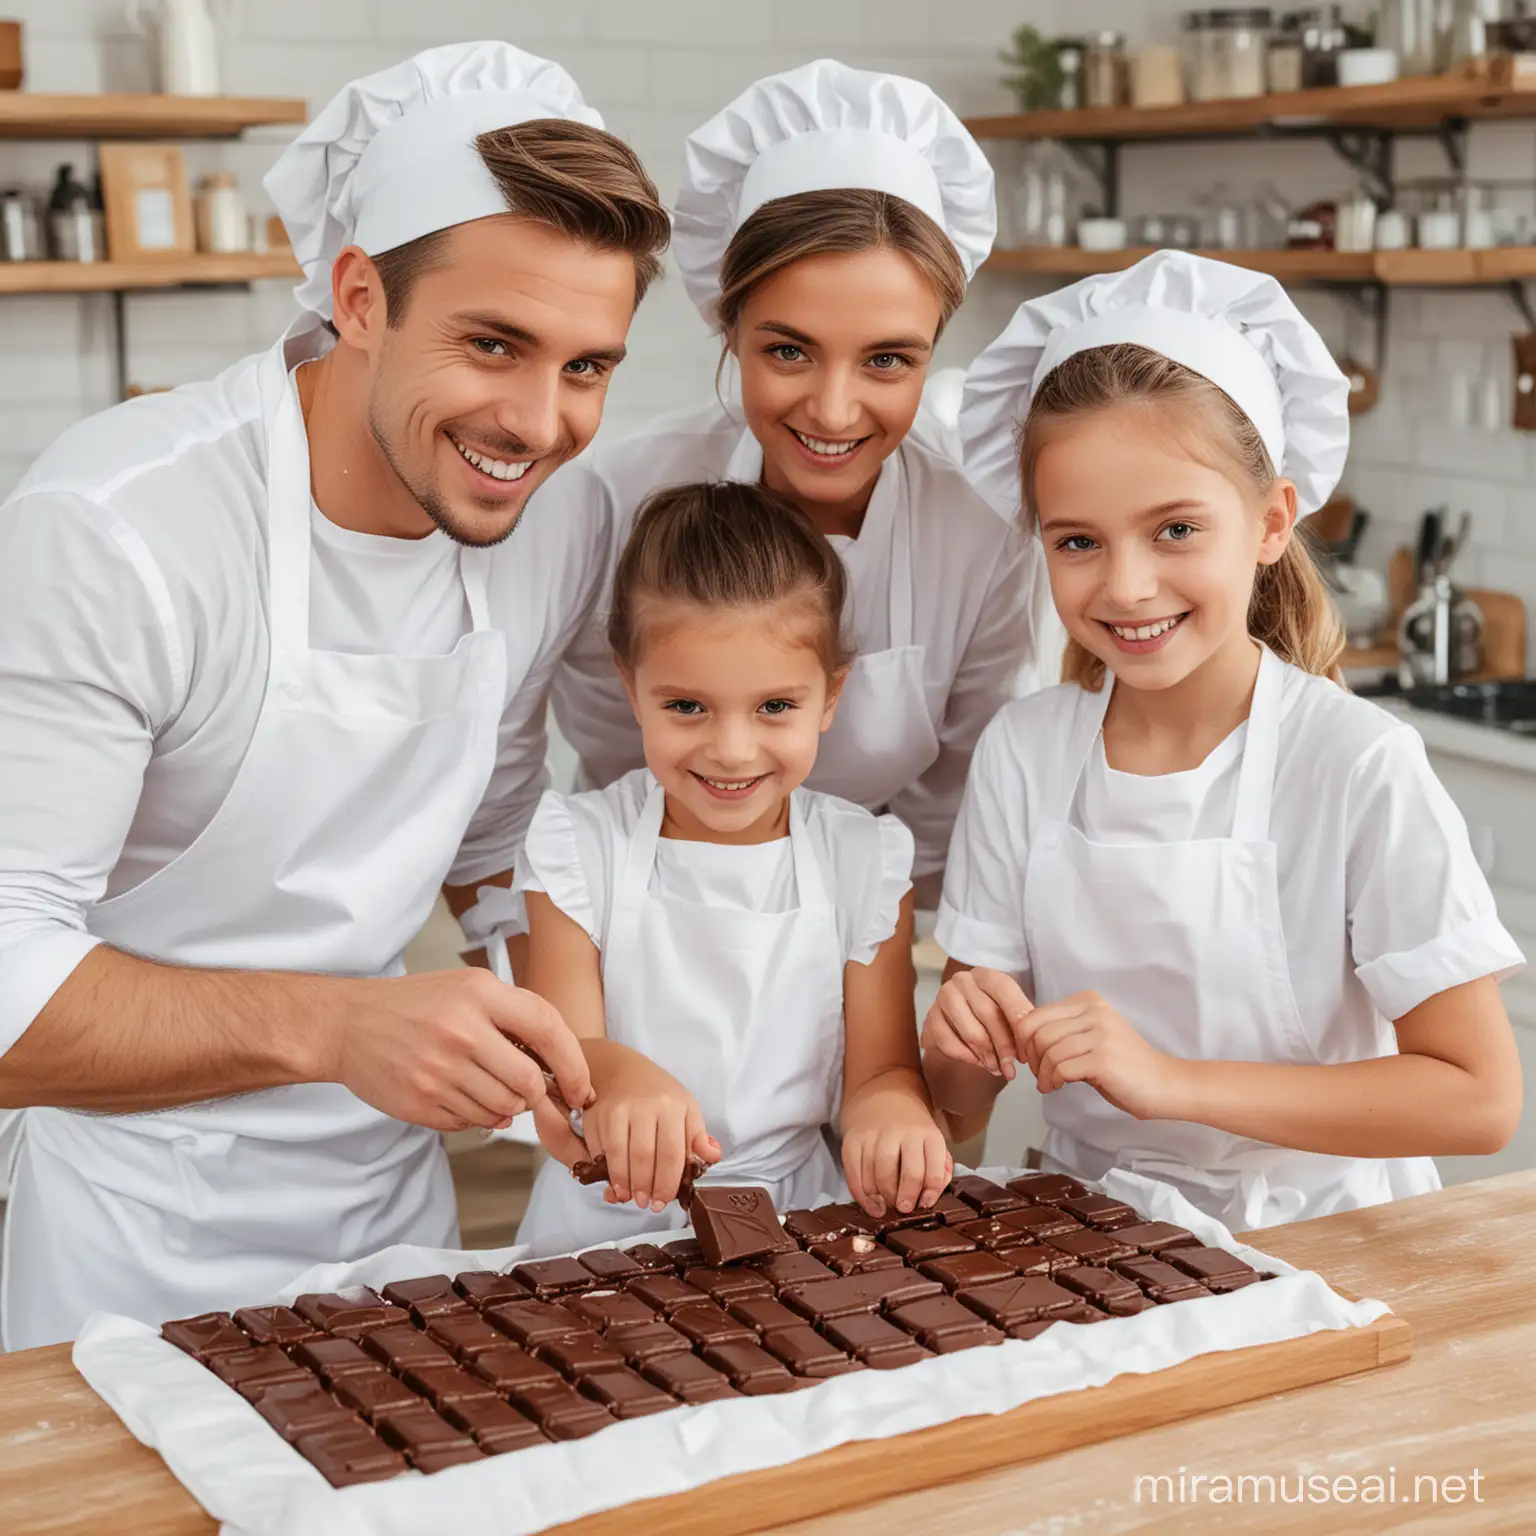 smile boy and girl and his mom and dad working/playing in white aprons, decorating a chocolate bar
